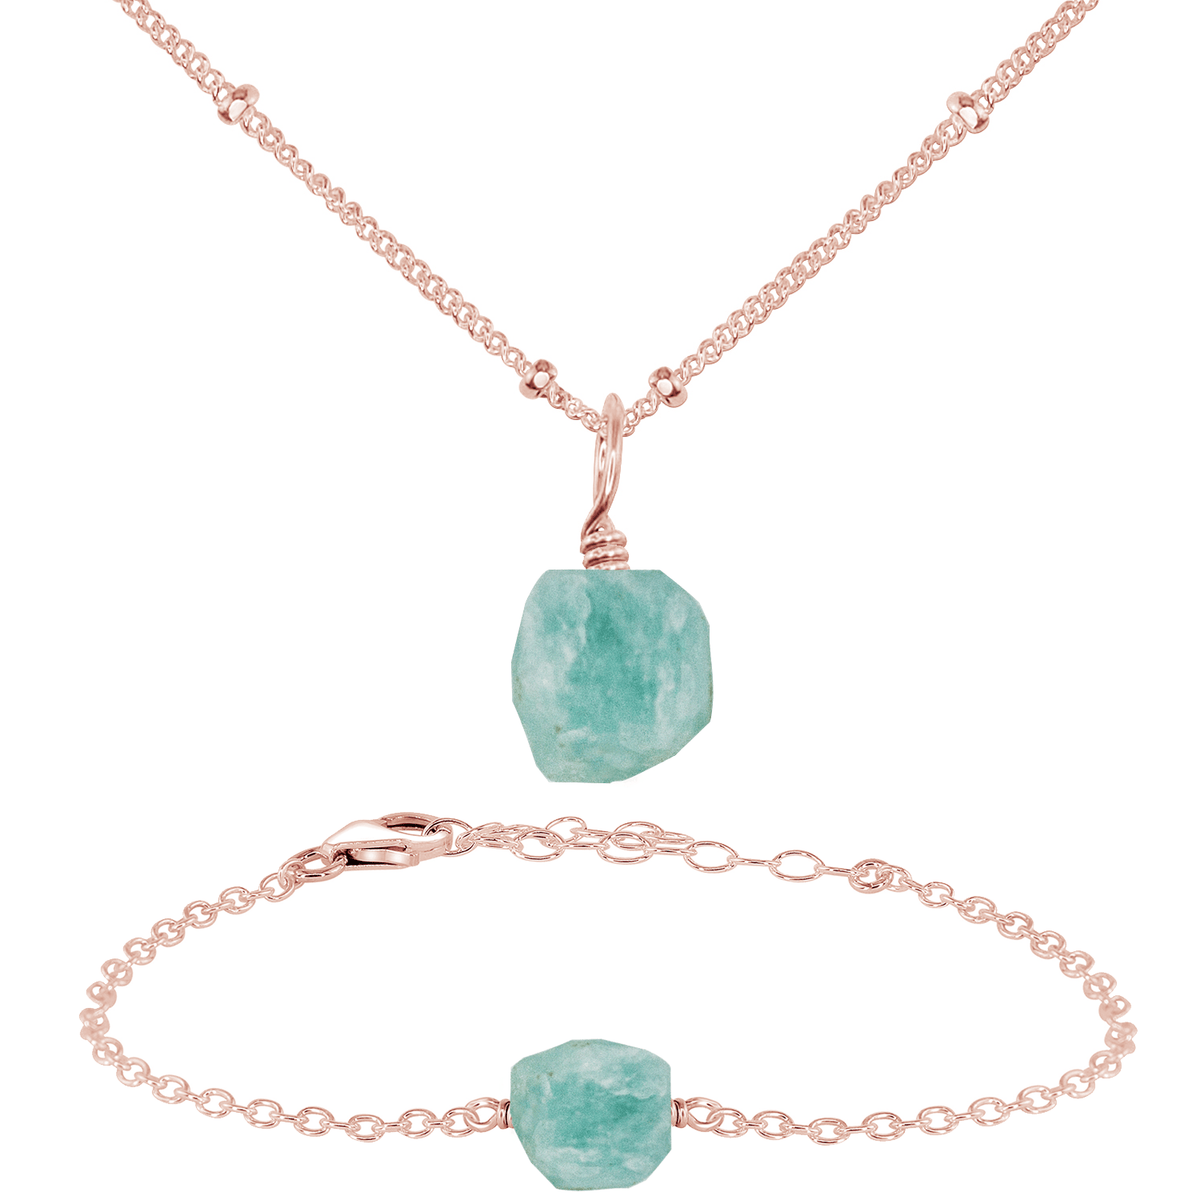 Raw Amazonite Crystal Necklace, Earrings and Bracelet Set - Raw Amazonite Crystal Necklace, Earrings and Bracelet Set - 14k Rose Gold Fill / Satellite / Necklace & Bracelet - Luna Tide Handmade Crystal Jewellery